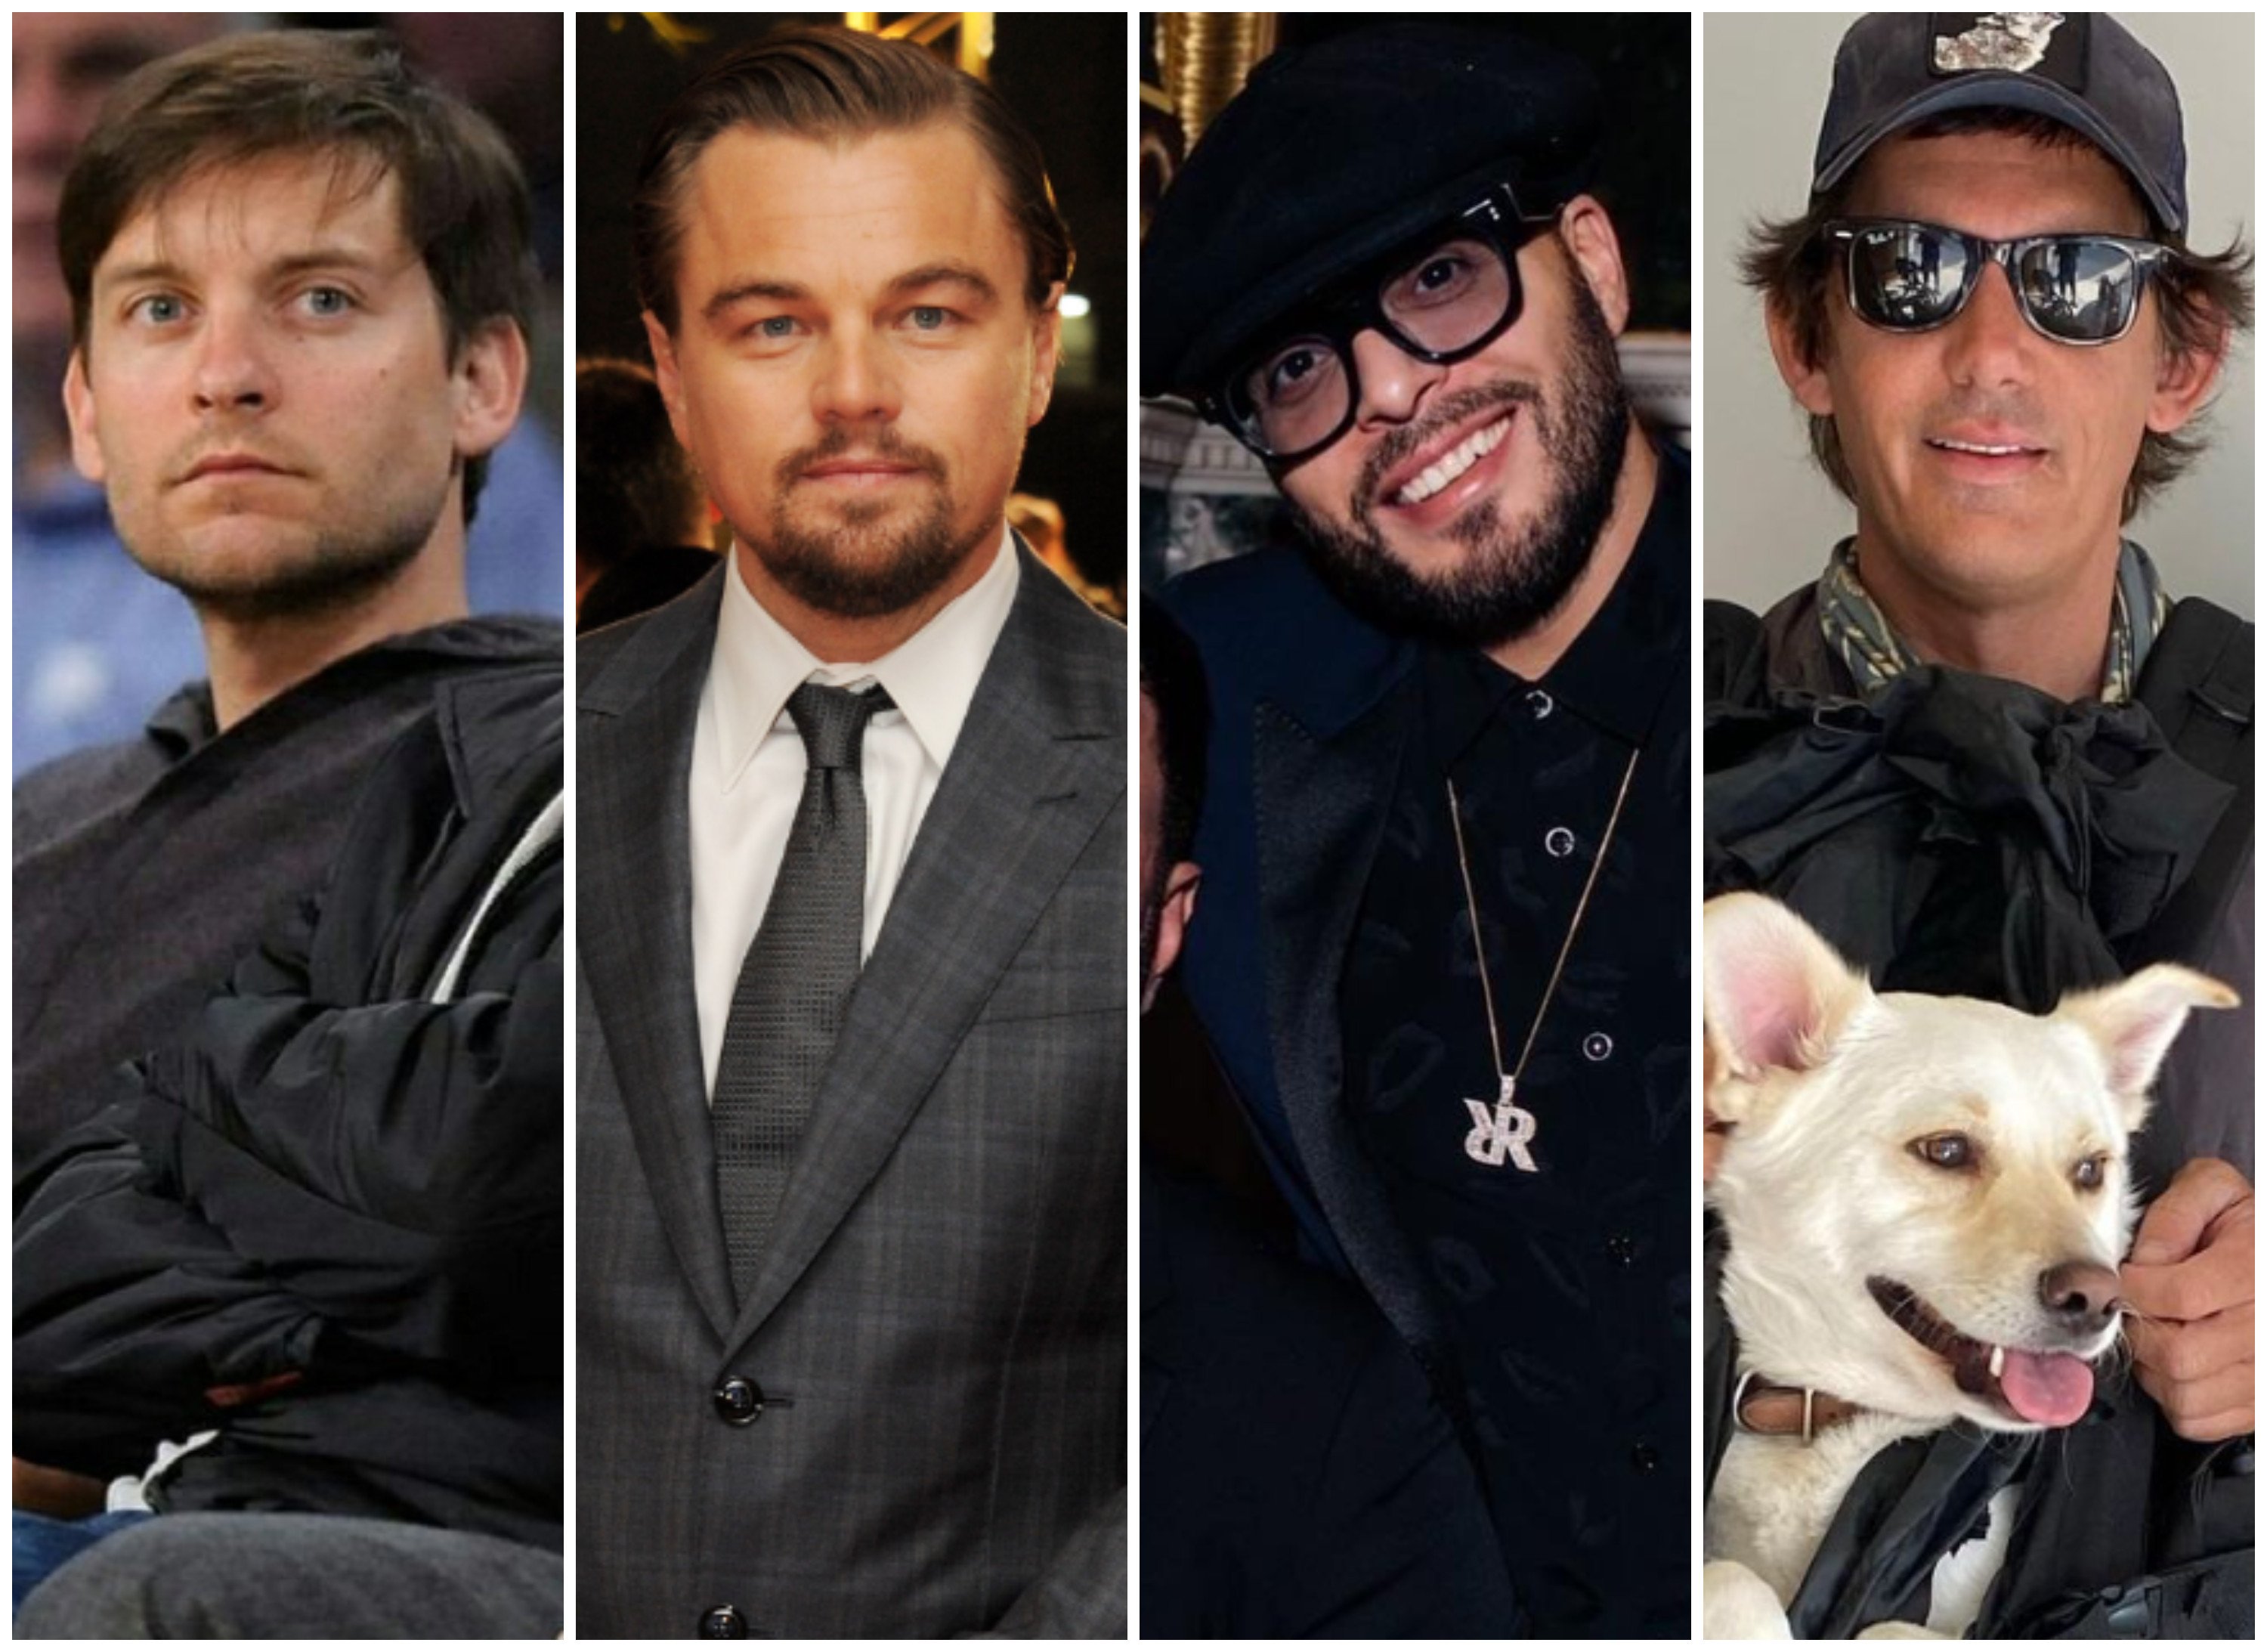 Do you wanna be in my gang?Tobey Maguire, Leonardo DiCaprio, Richie Akiva and Lukas Haas. Photos: @LeoDiCaprio_PH/Twitter; Getty Images; @richieakiva, @lukashaas/Instagram